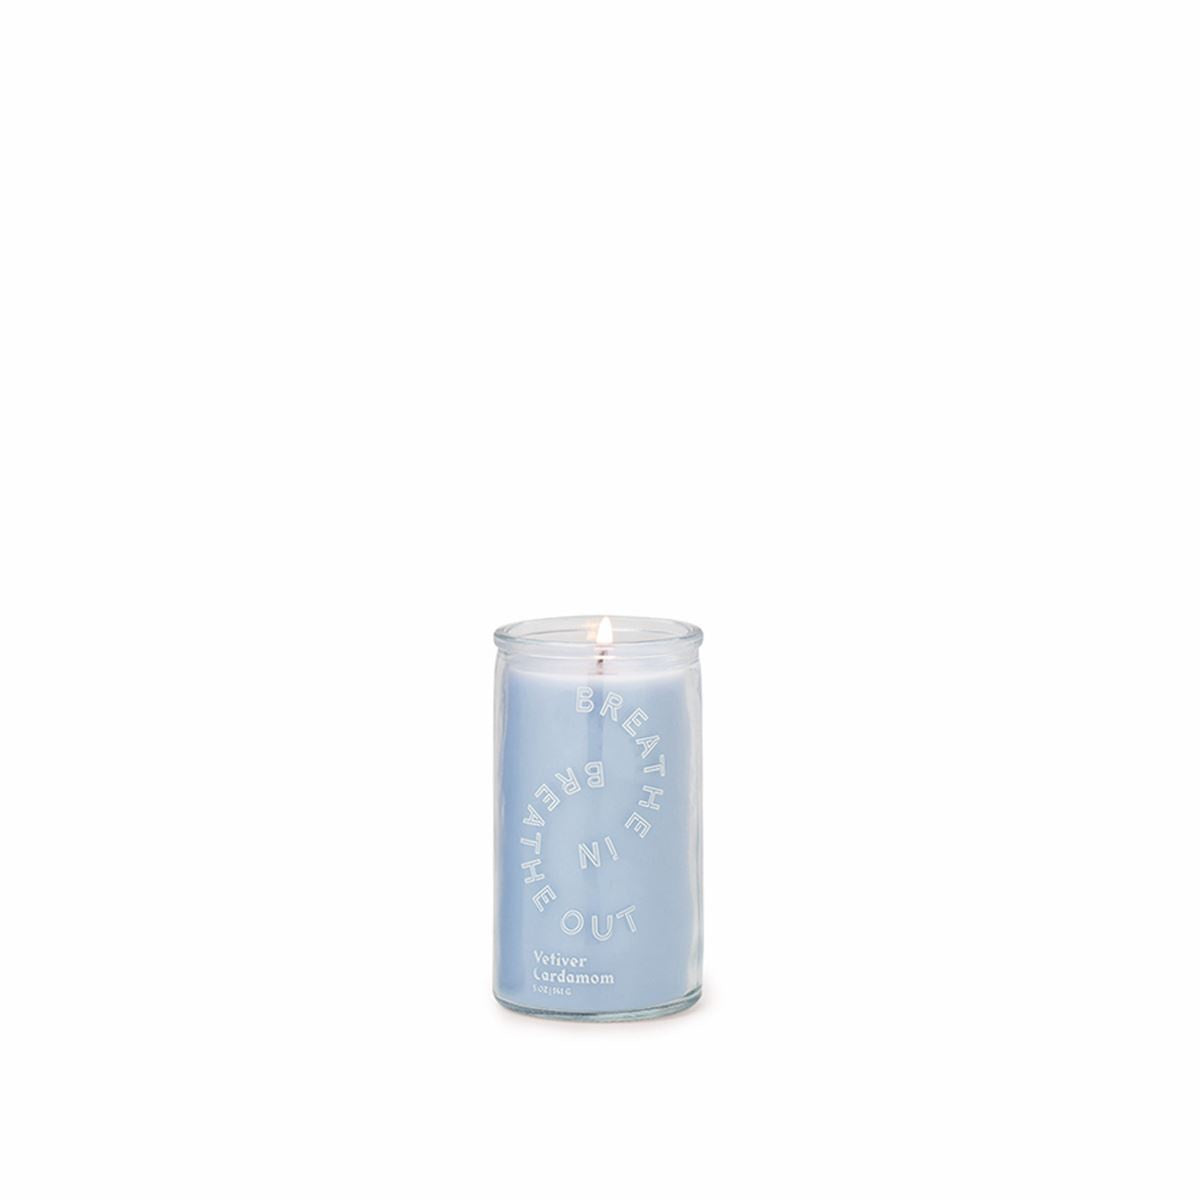 Breathe In, Breathe Out Vetiver Cardamom Prayer Candle